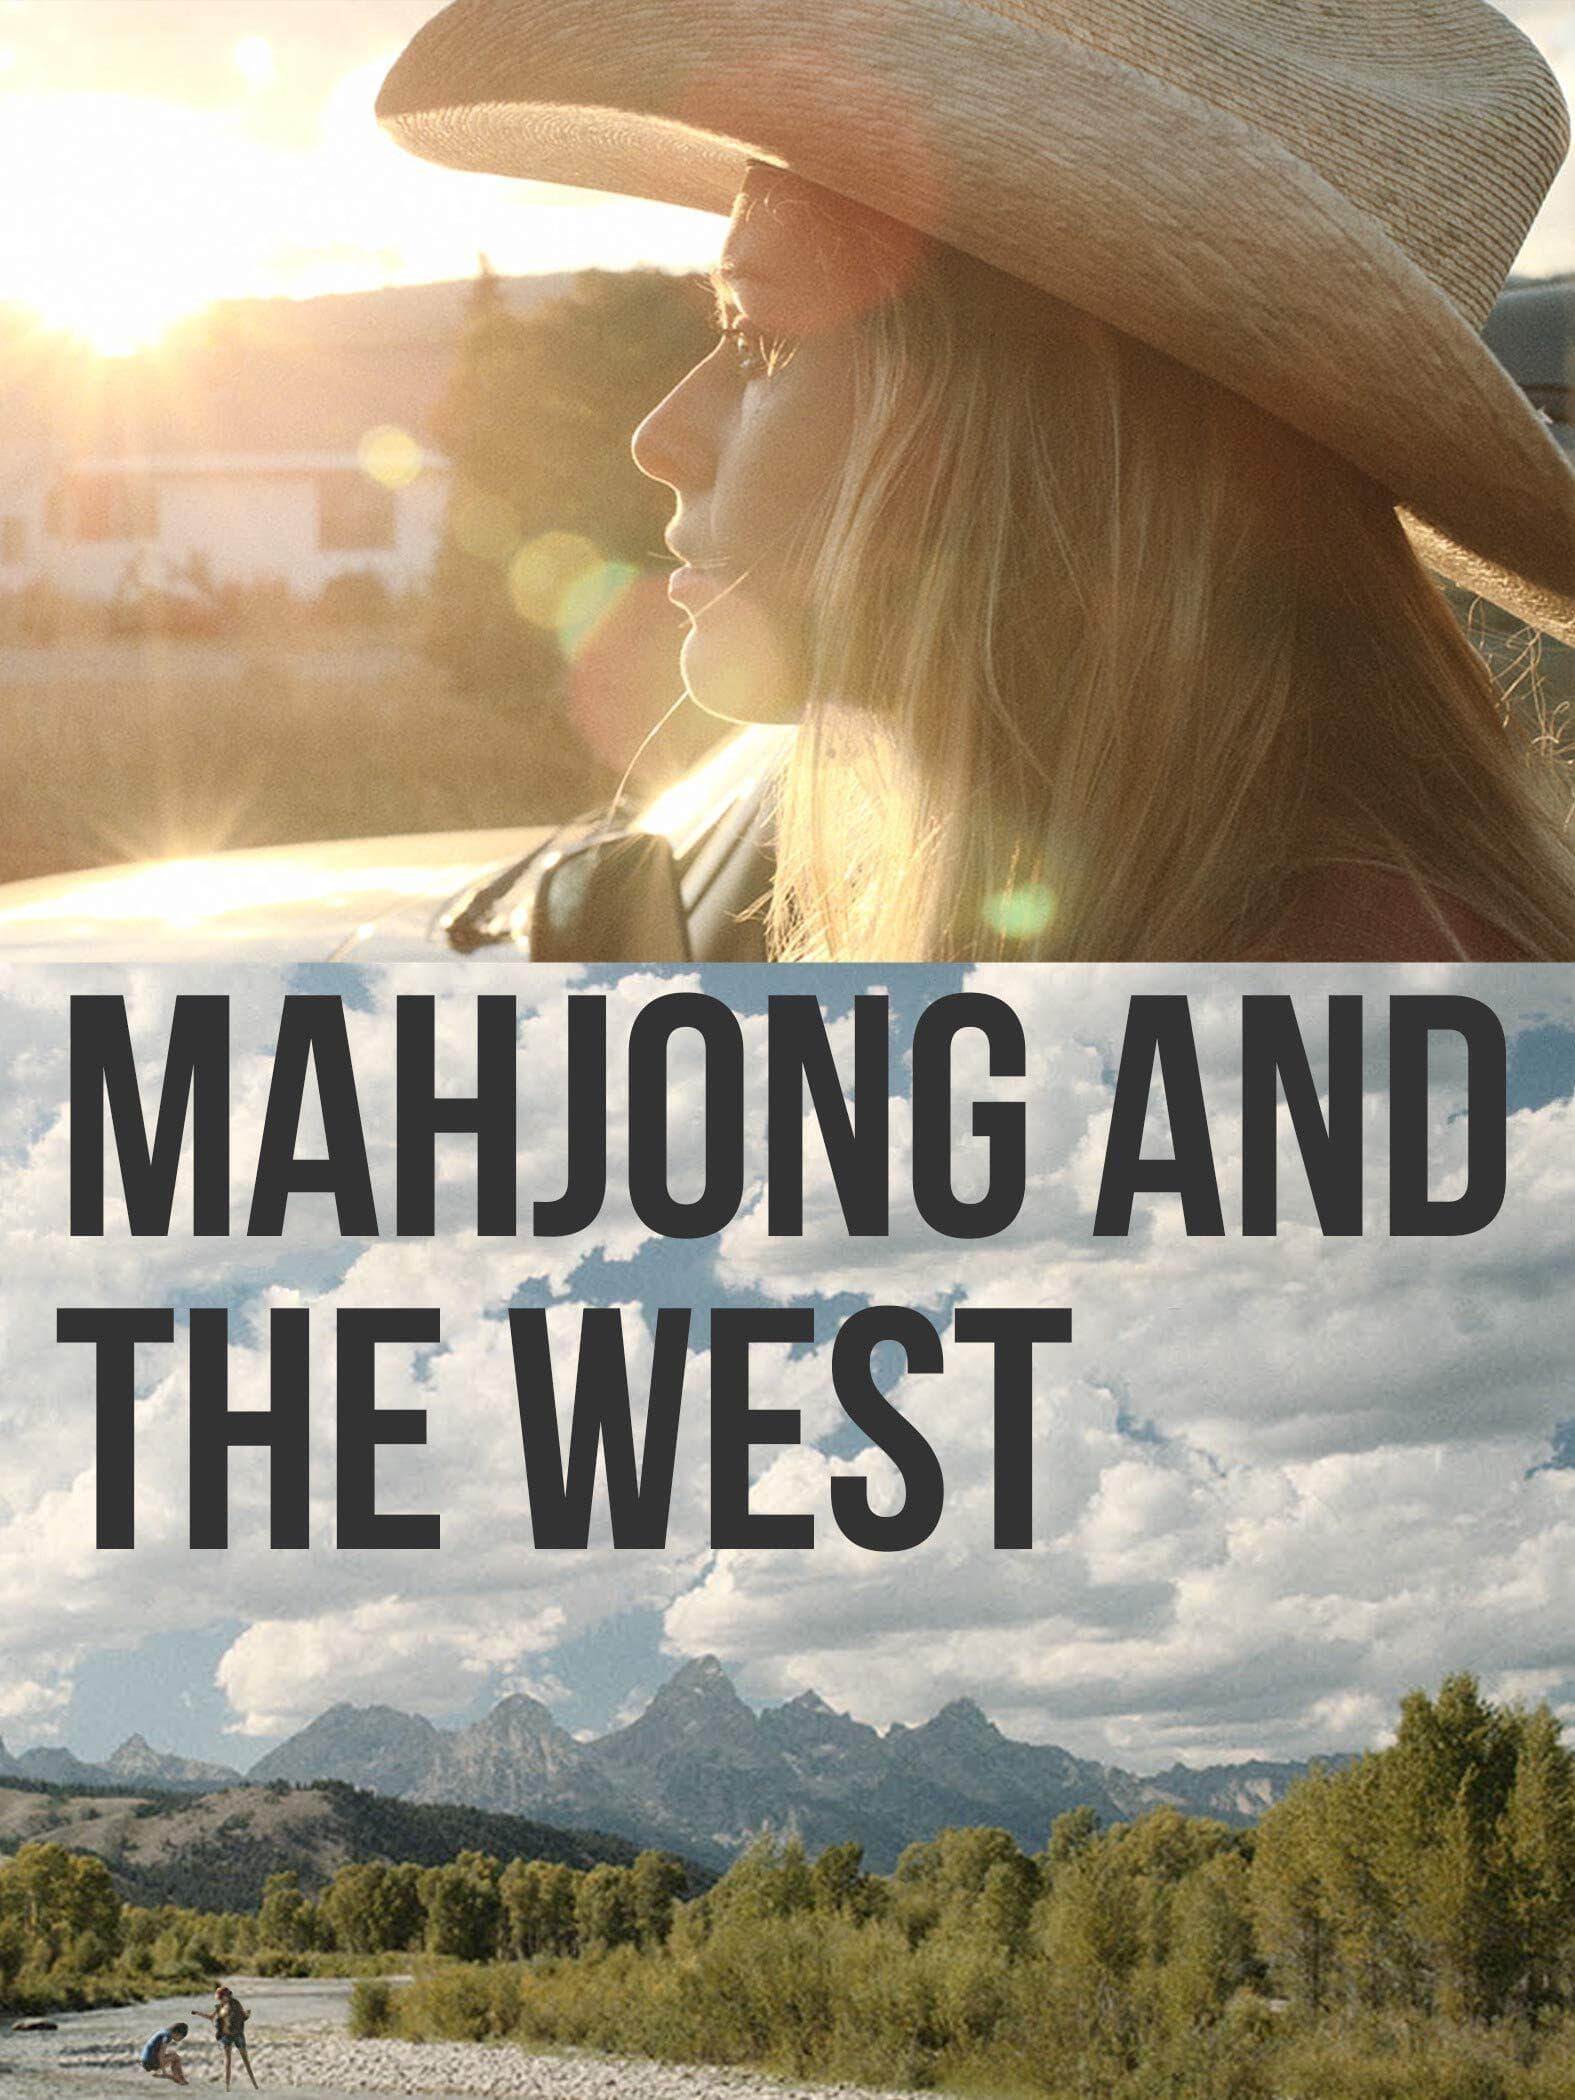 Mahjong and the West poster